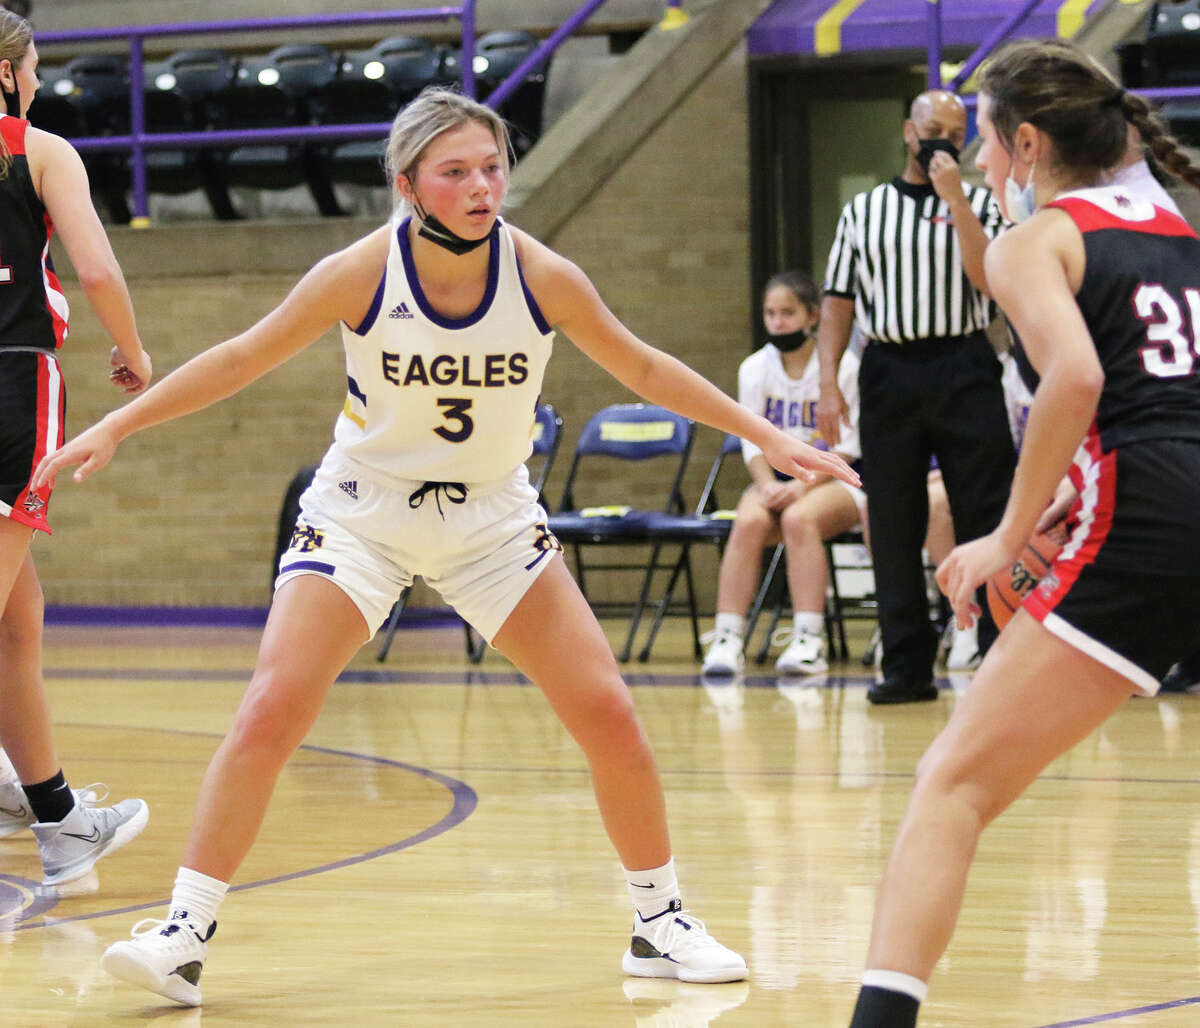 CM's Kelbie Zupan (3) defends a Mount Zion ballhander in a game last month at the Taylorville Tourney. On Saturday night, Zupan scored a career-high 22 points in the Eagles victory over Parkway South at the Visitation Christmas Tournament in St. Louis.  